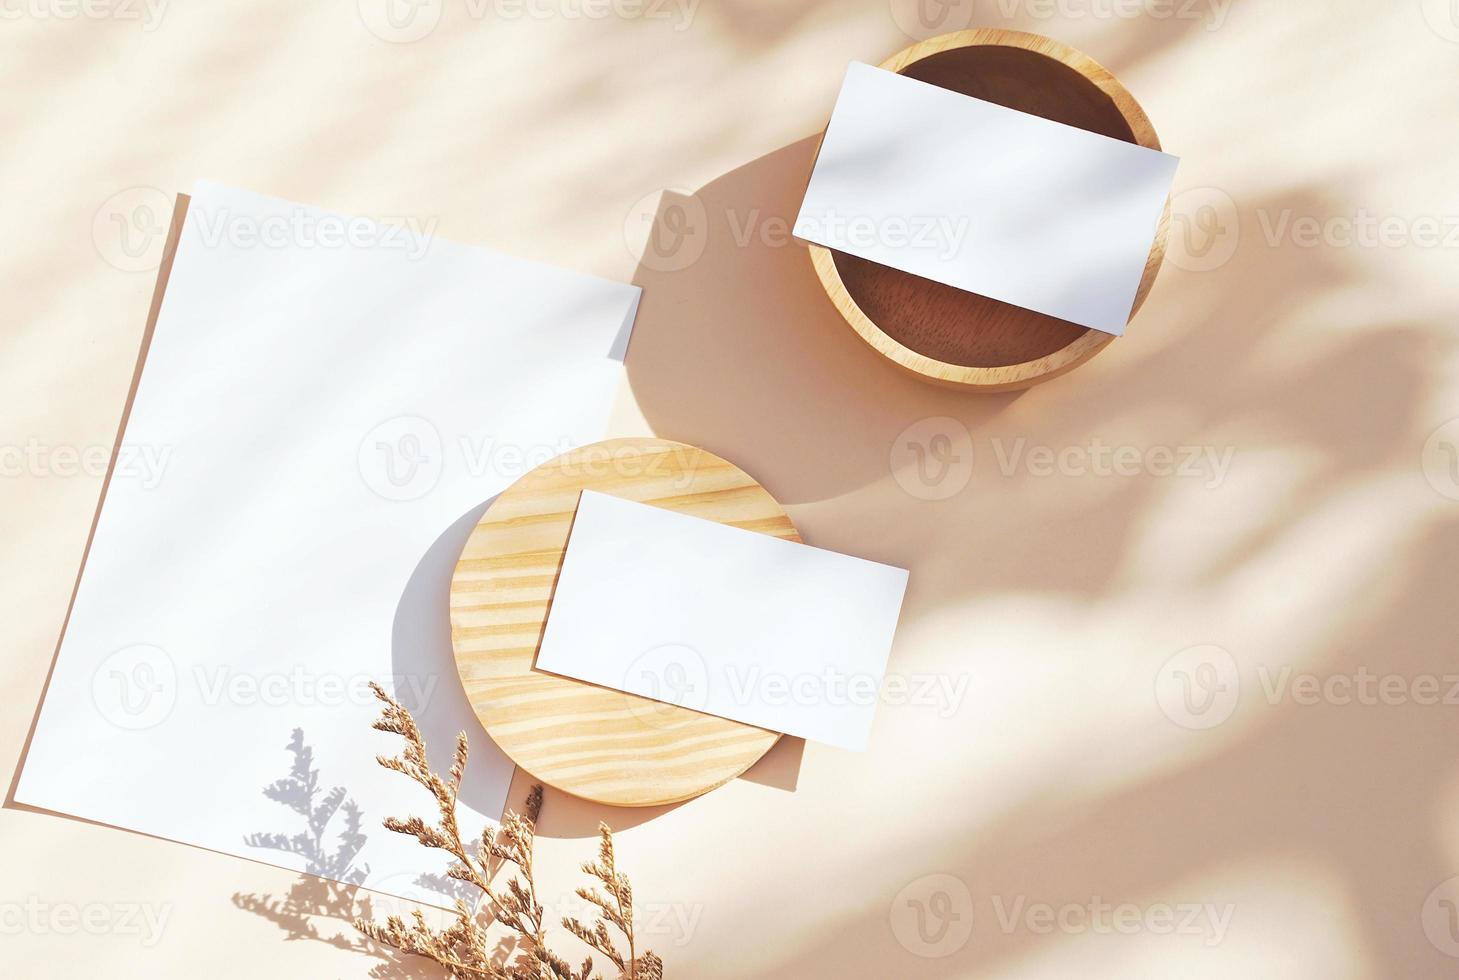 Flat lay of branding identity business name card on yellow background with flower and wooden container, light and shadow shape leaves, minimal concept for design photo